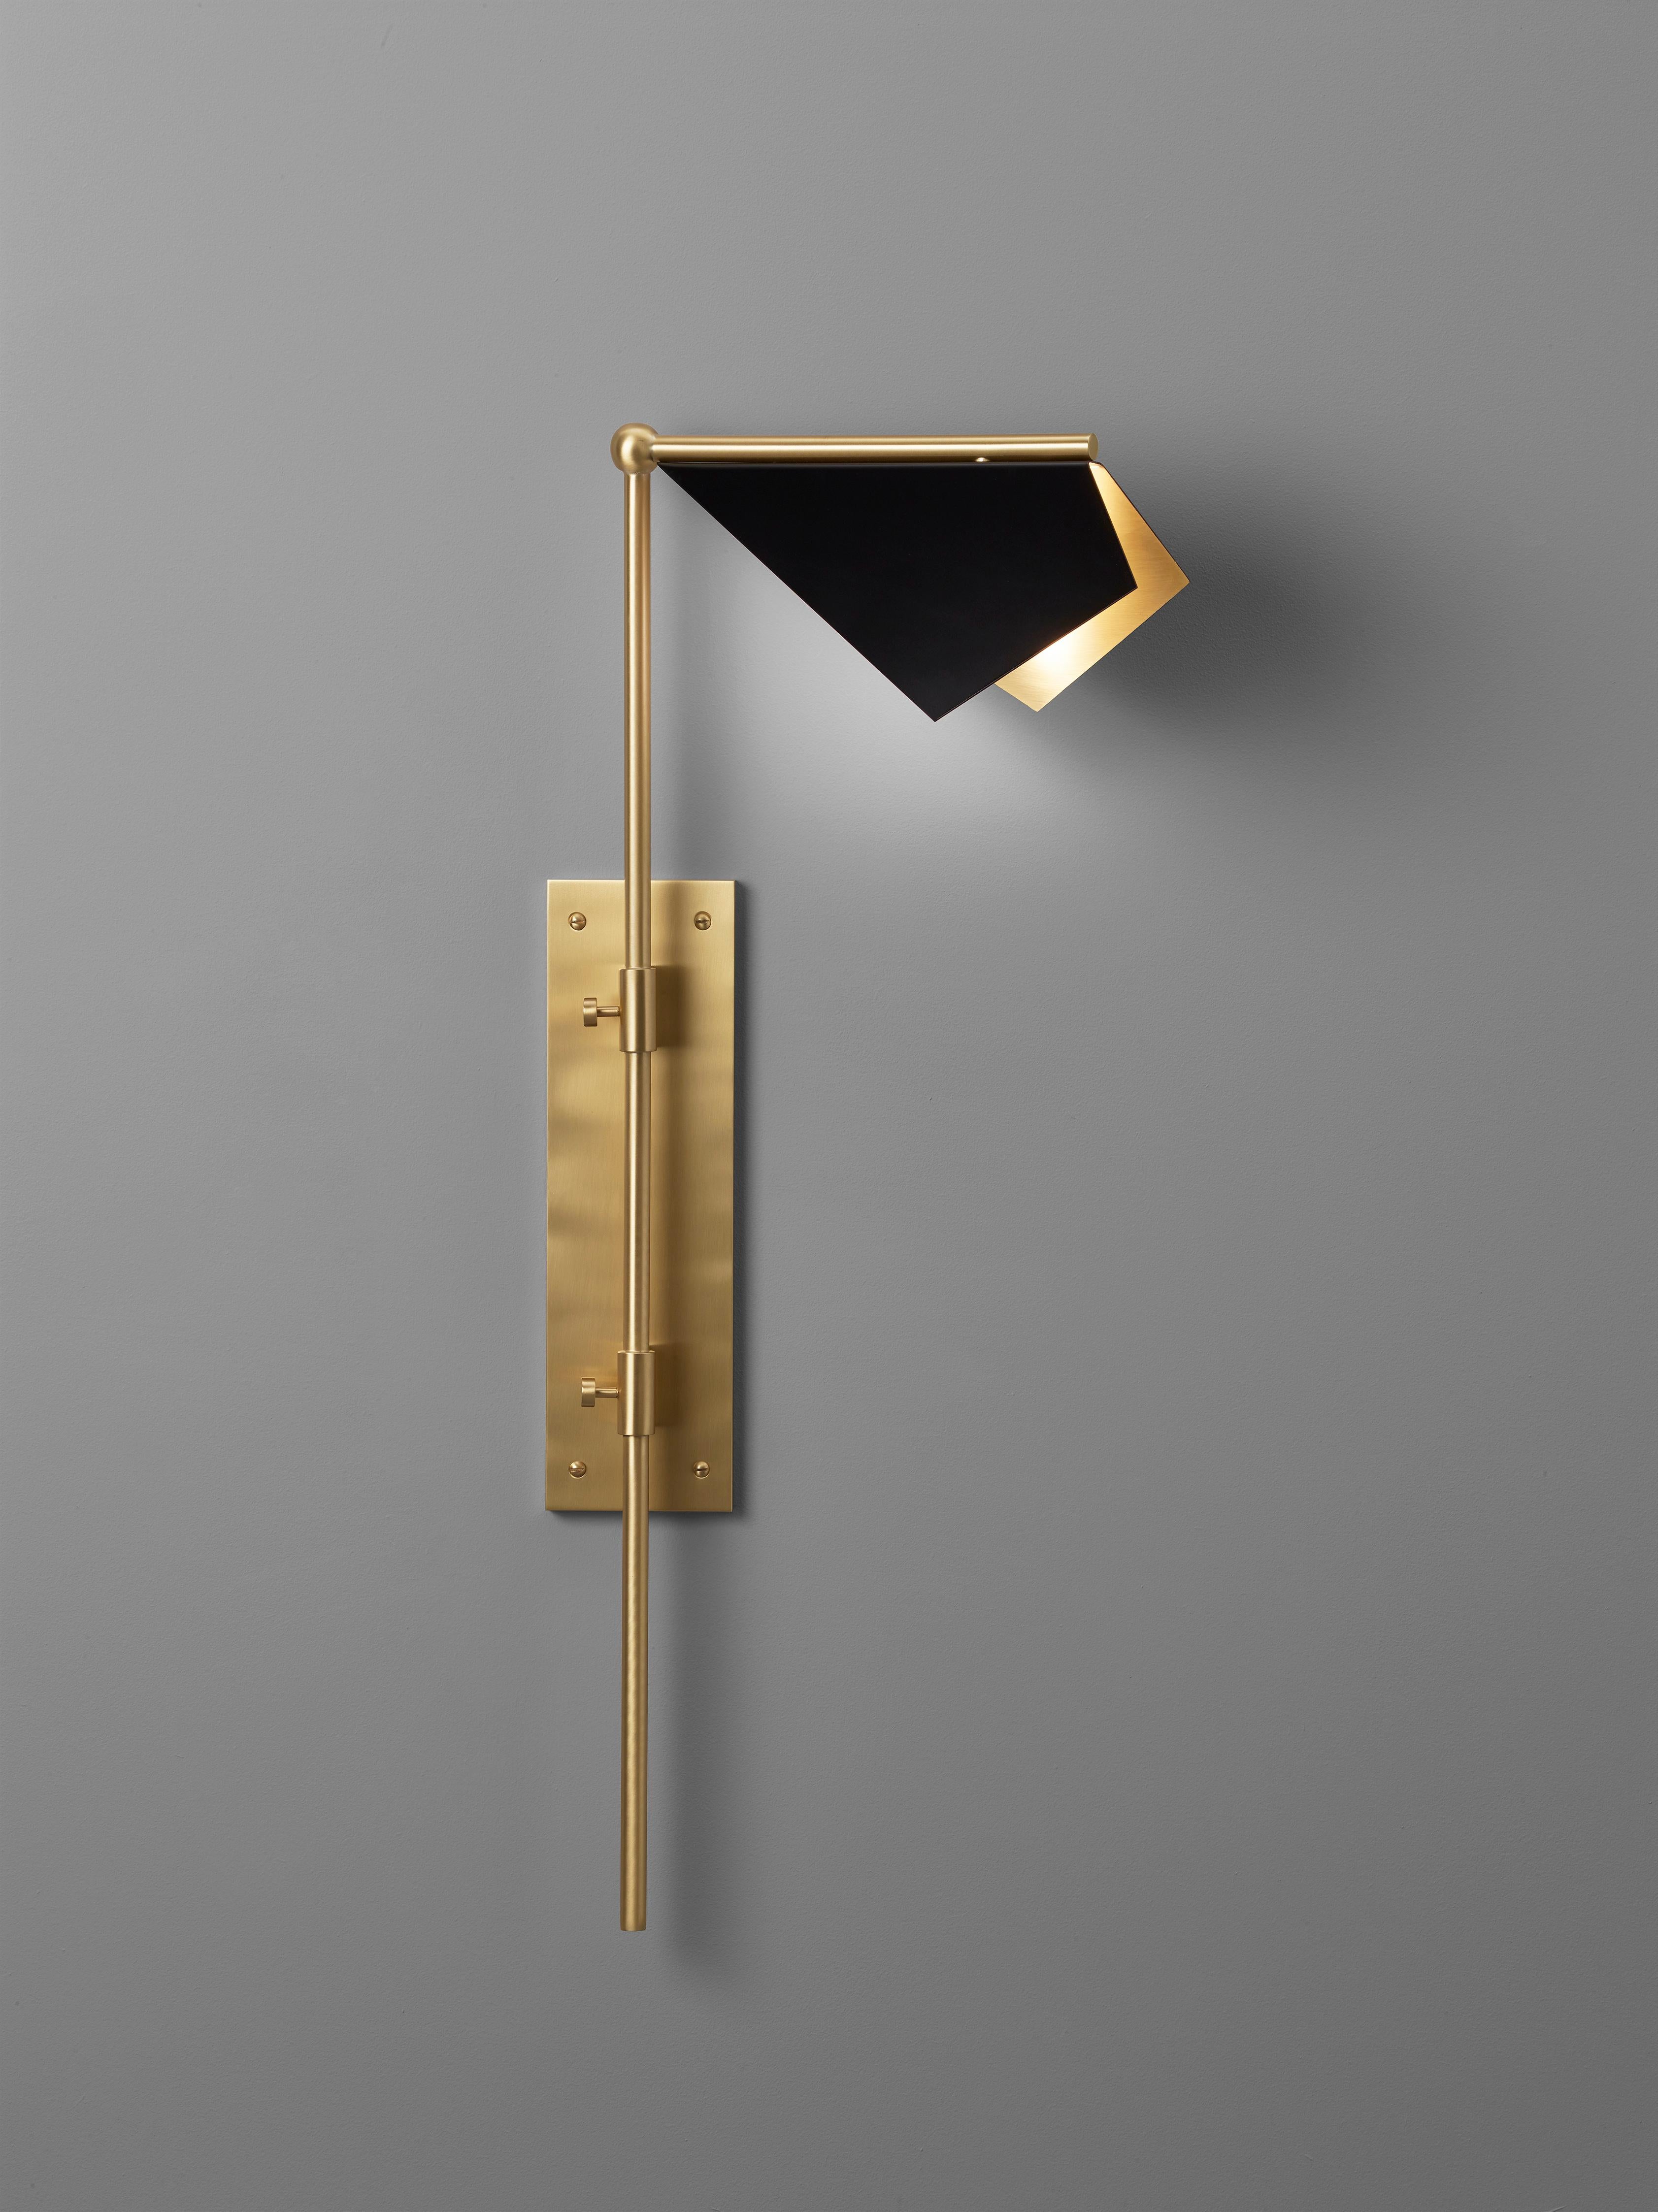 Design and crafted by world-renowned lighting brand IMAGIN, and inspired from observing bats while on vacation, this wall light combines a simple folded brass shade along with a long arm brass base. The topside of the shade finished in matt black